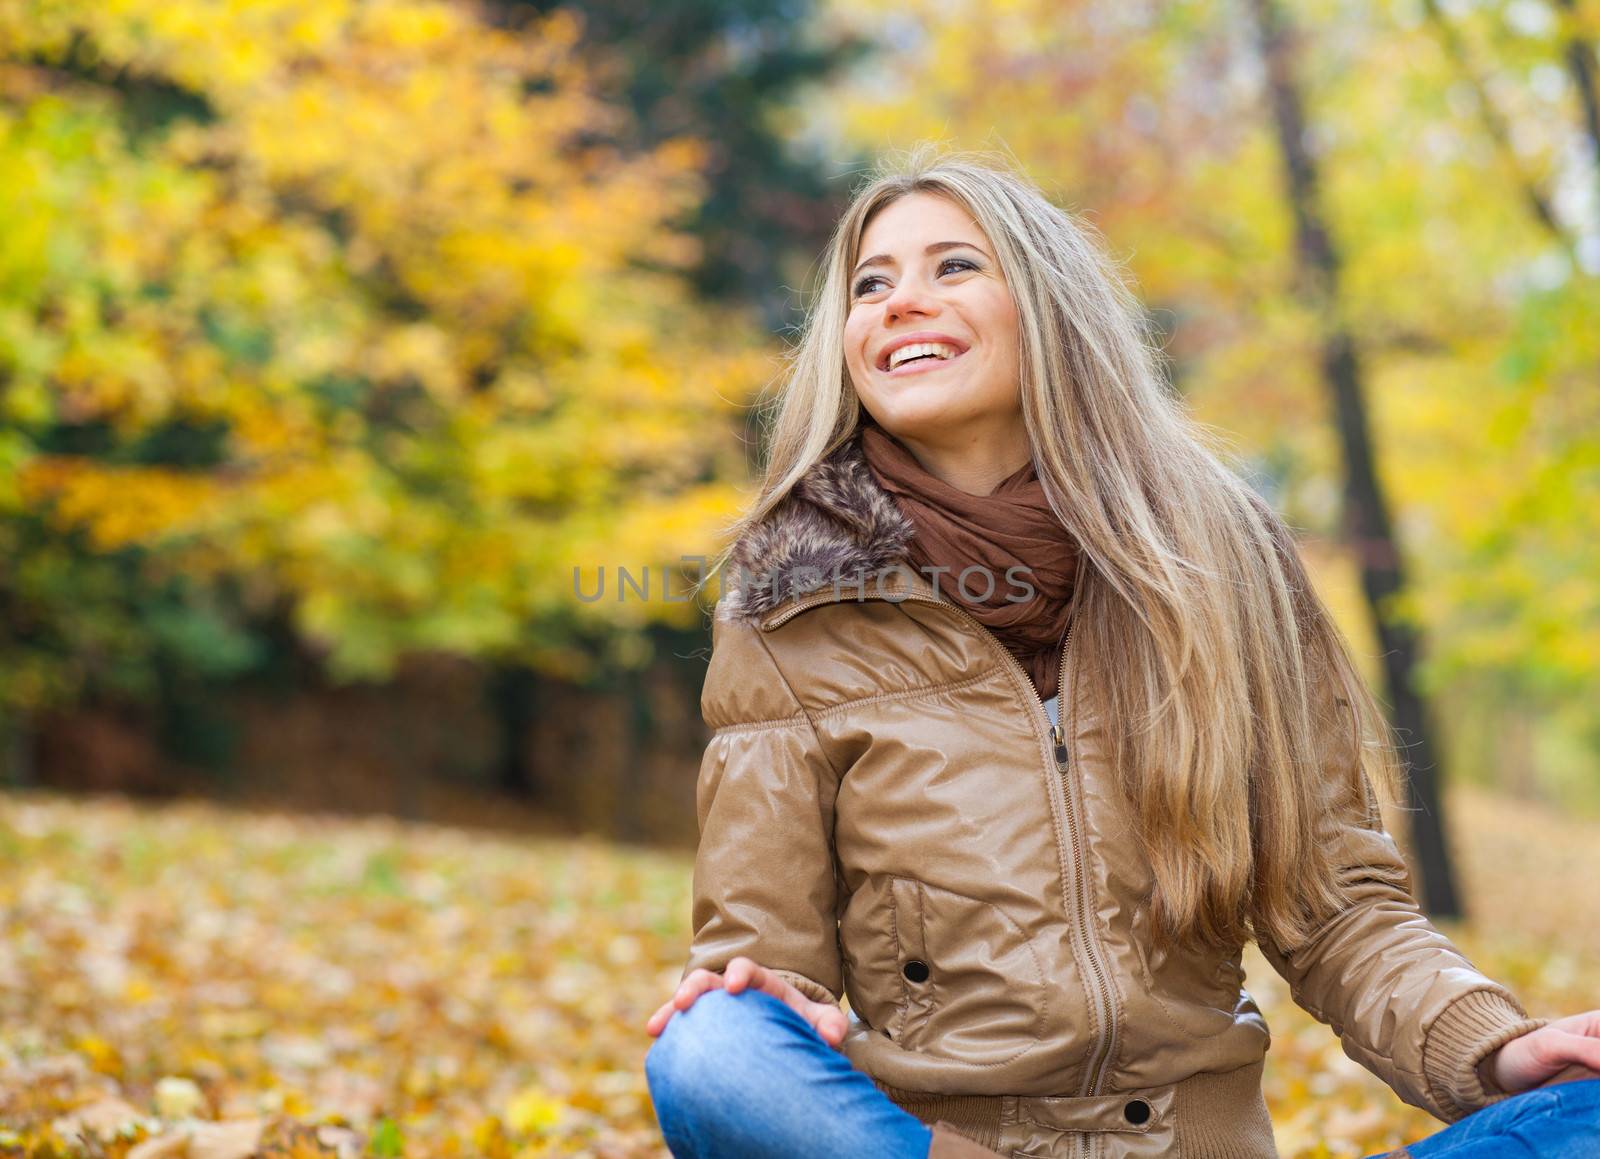 Young blond woman in a park in autumn